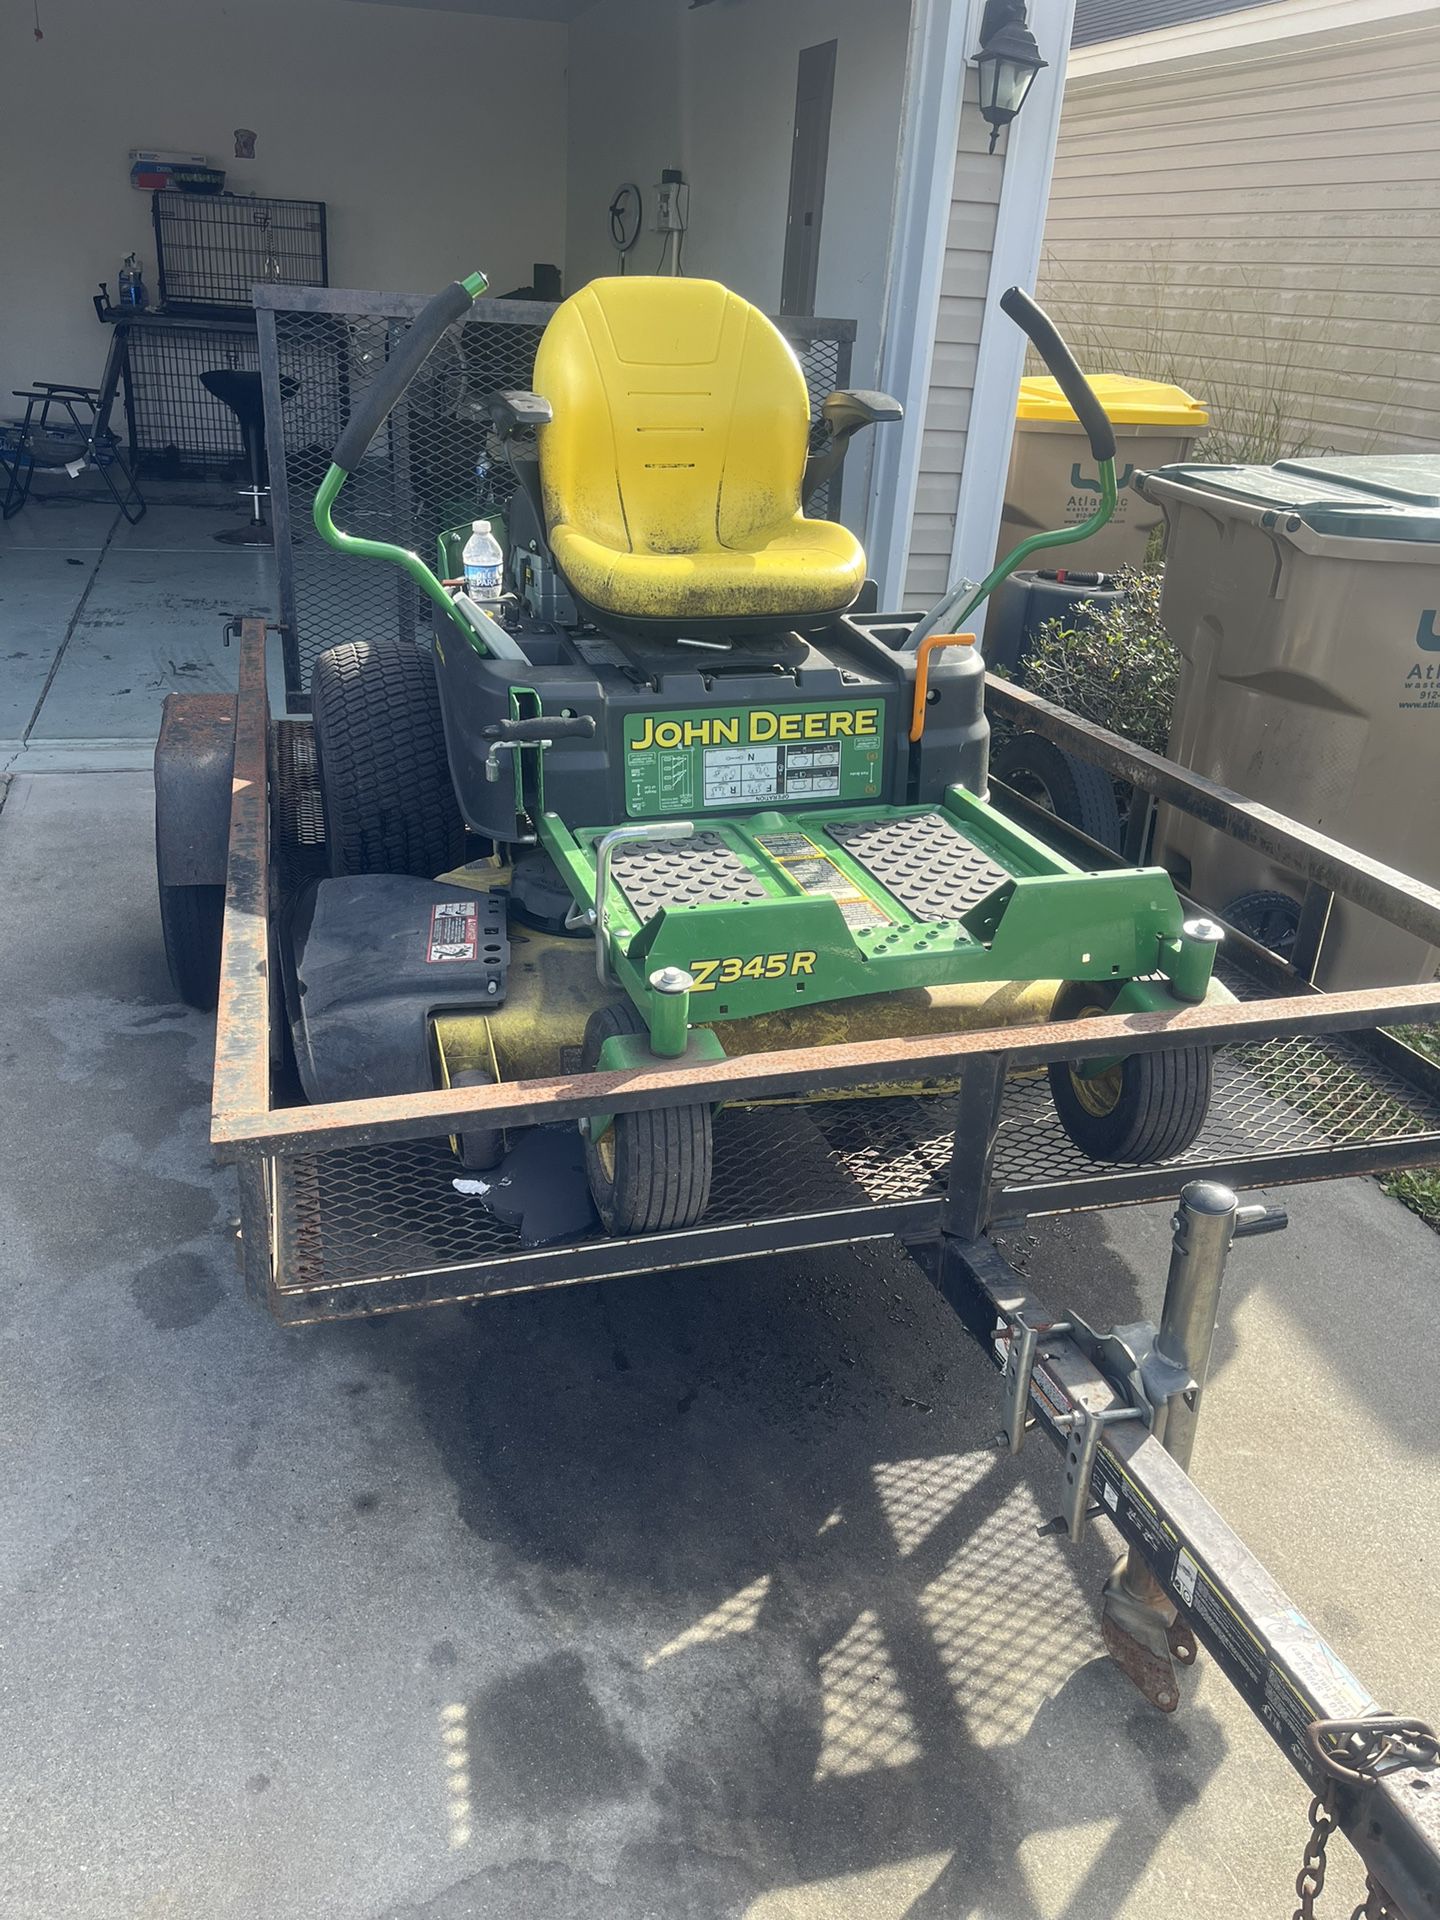 Package Deal Lawn Care Setup!!!